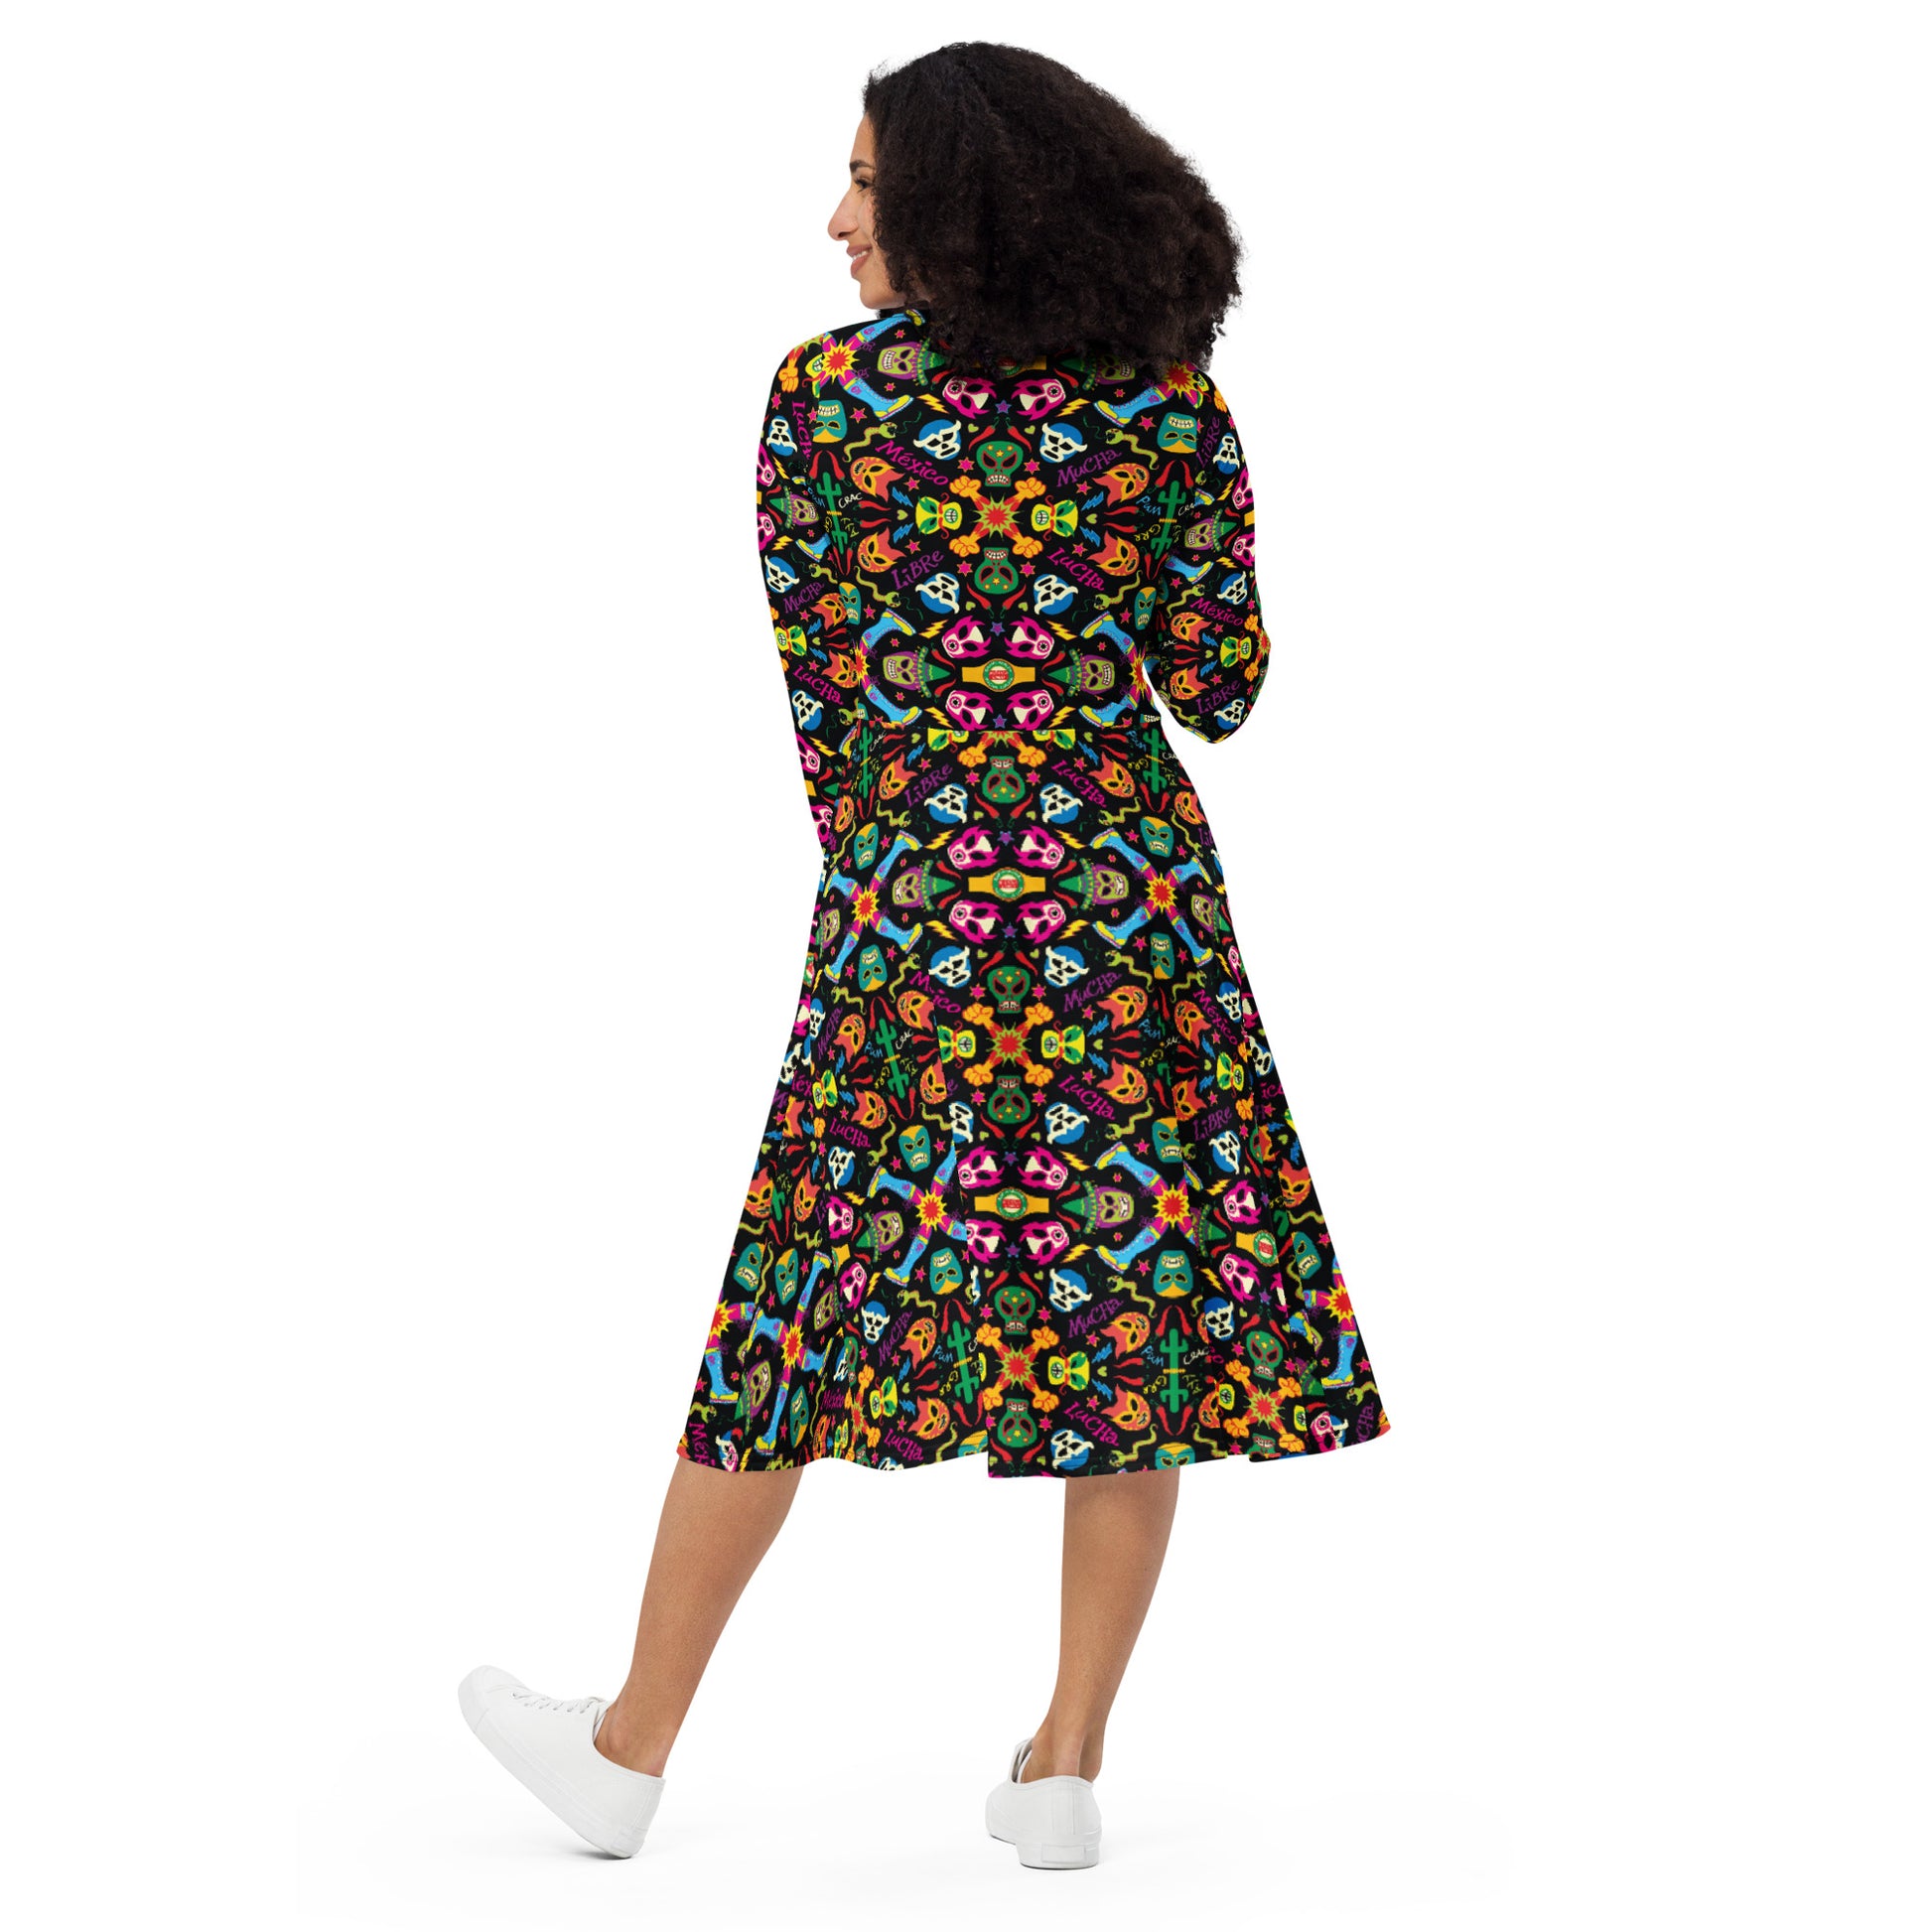 Mexican wrestling colorful party All-over print long sleeve midi dress. Back view